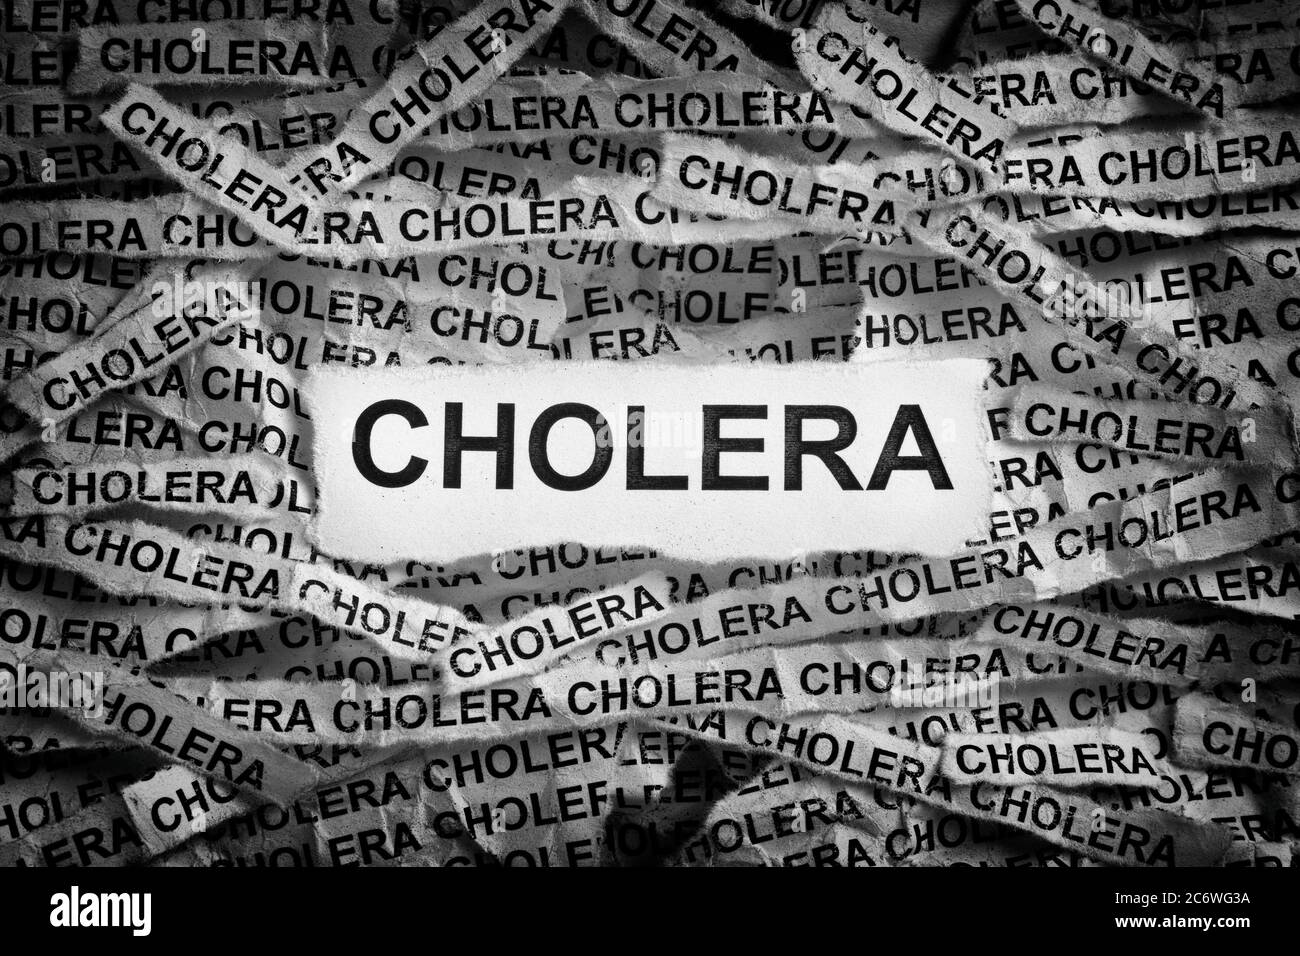 Cholera. Torn pieces of paper with the word Cholera. Concept Image. Black and white. Close up. Stock Photo